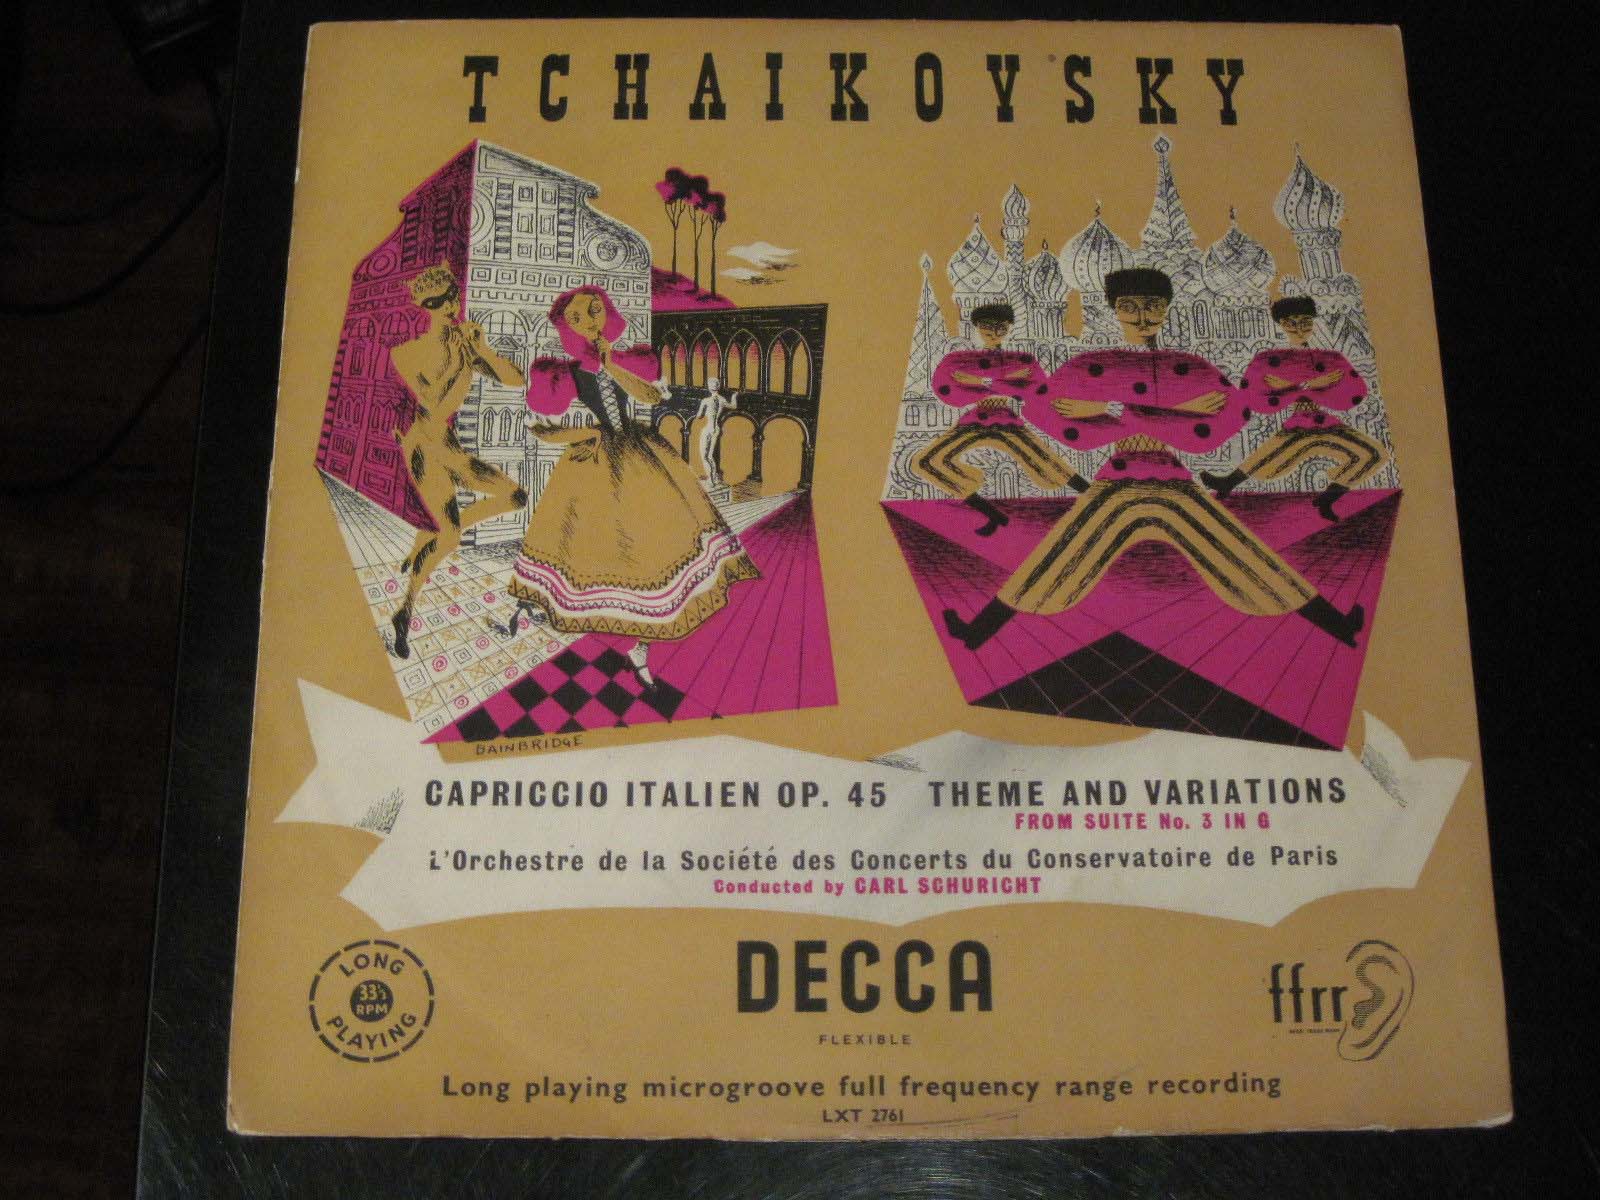 Tchaikovsky - Capriccio Italien Op.45 Theme and Variations